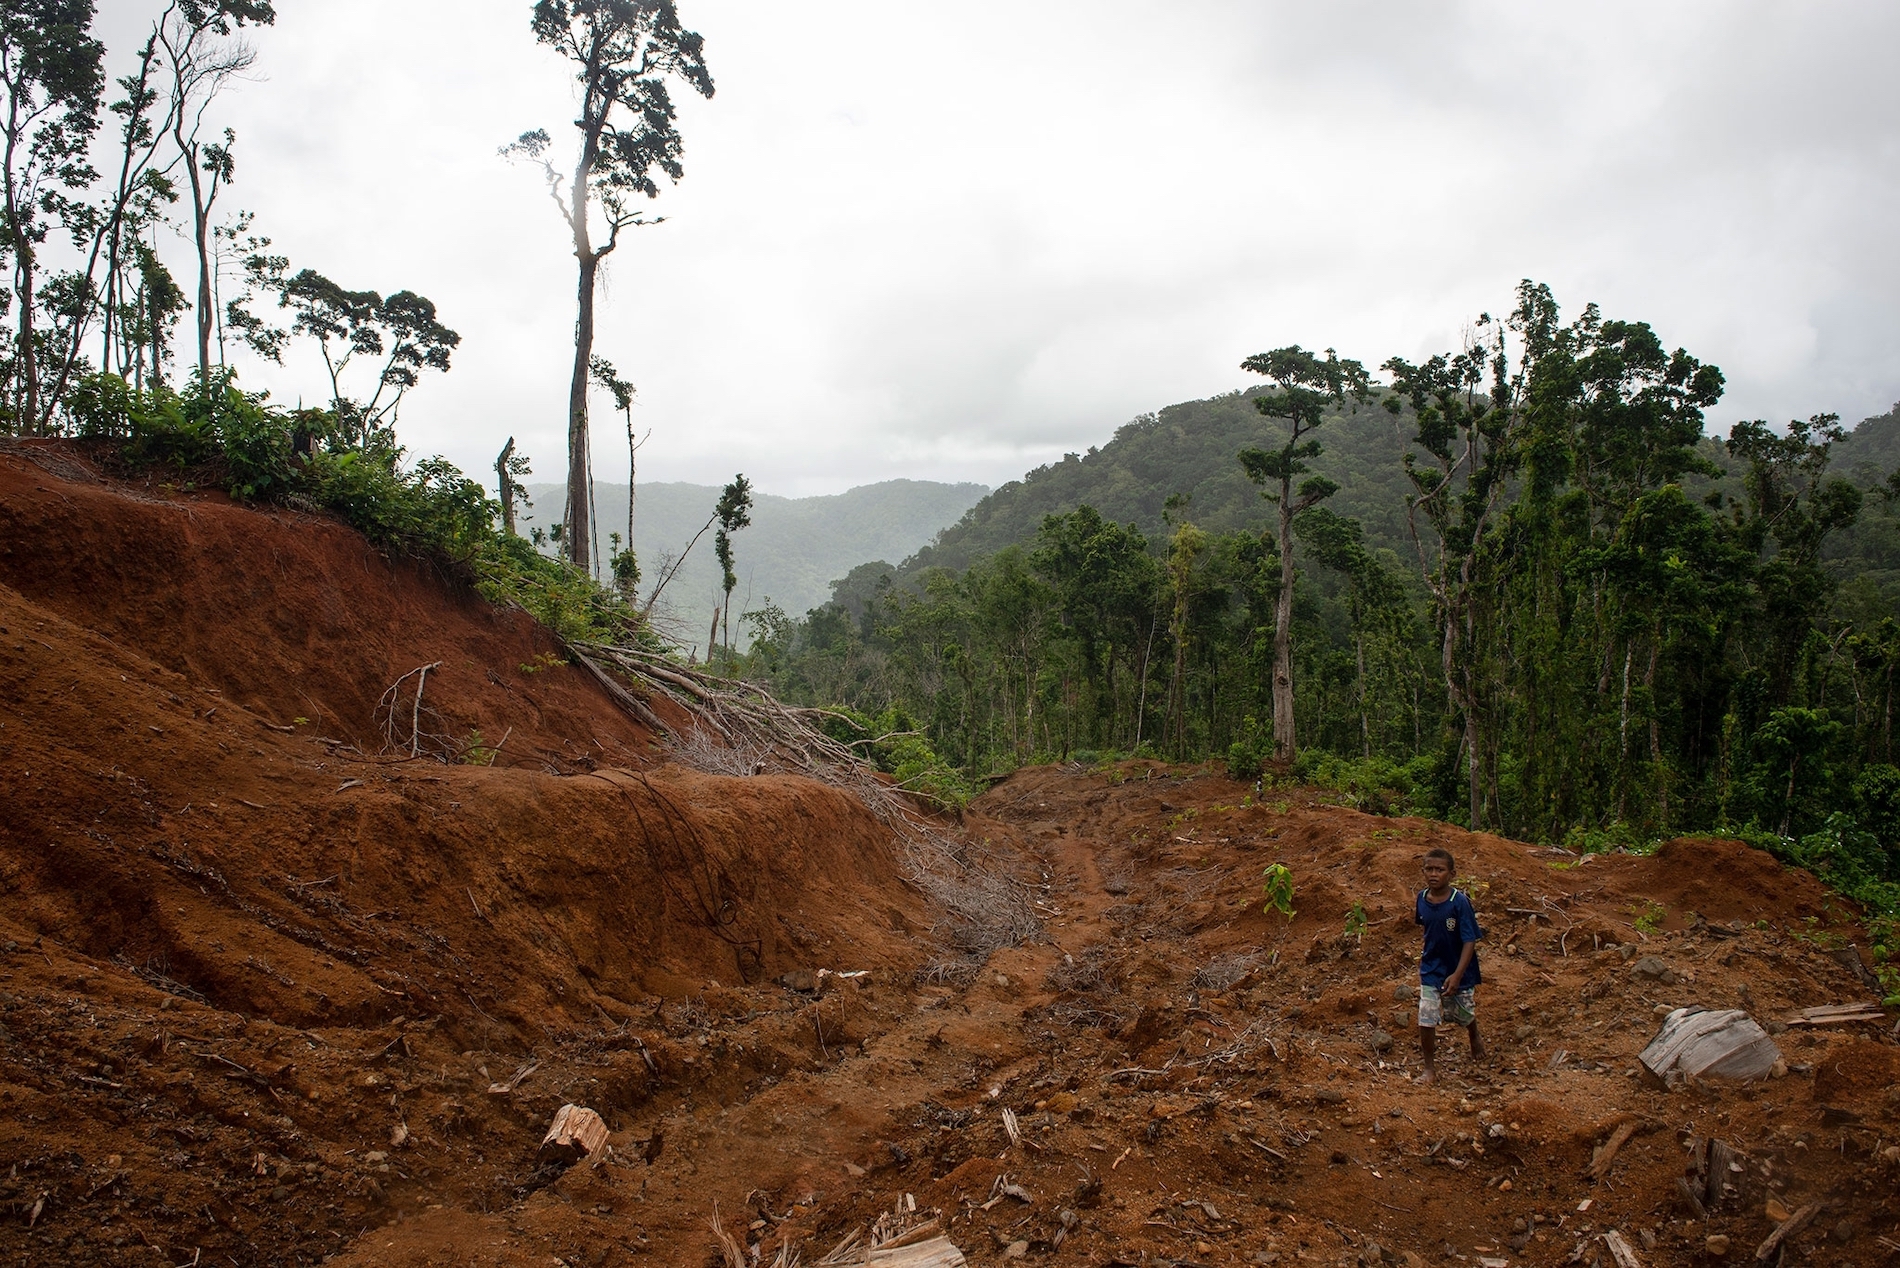 A logging road leads up to the main camp of Gallego, a logging company forced to stop operations by a local community. PHOTOGRAPH BY MONIQUE JAQUES